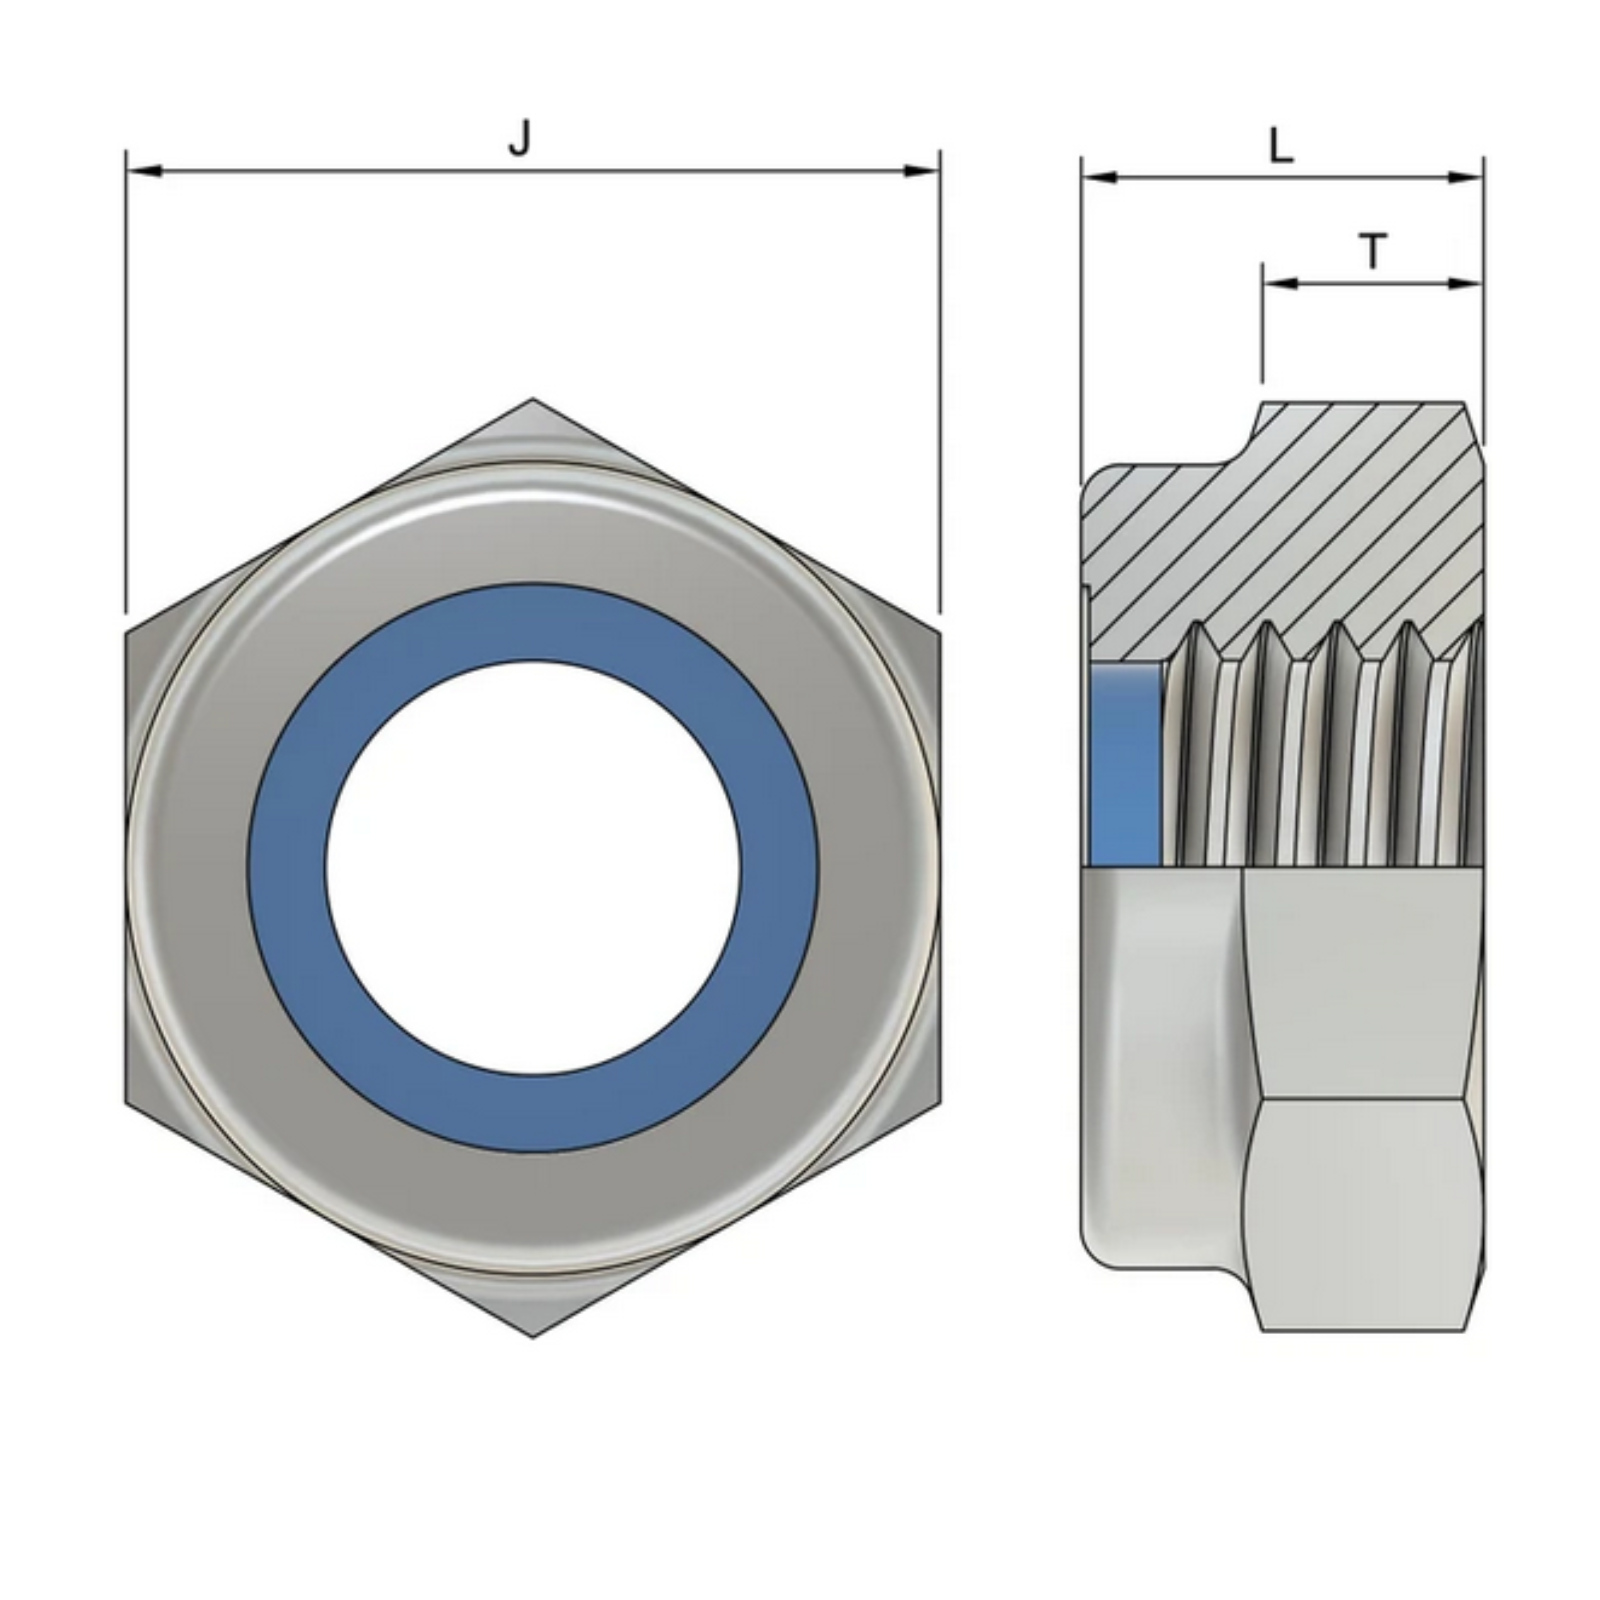 M14 Hexagon Nylon Locking Nuts (DIN 985) - Stainless Steel (A4)